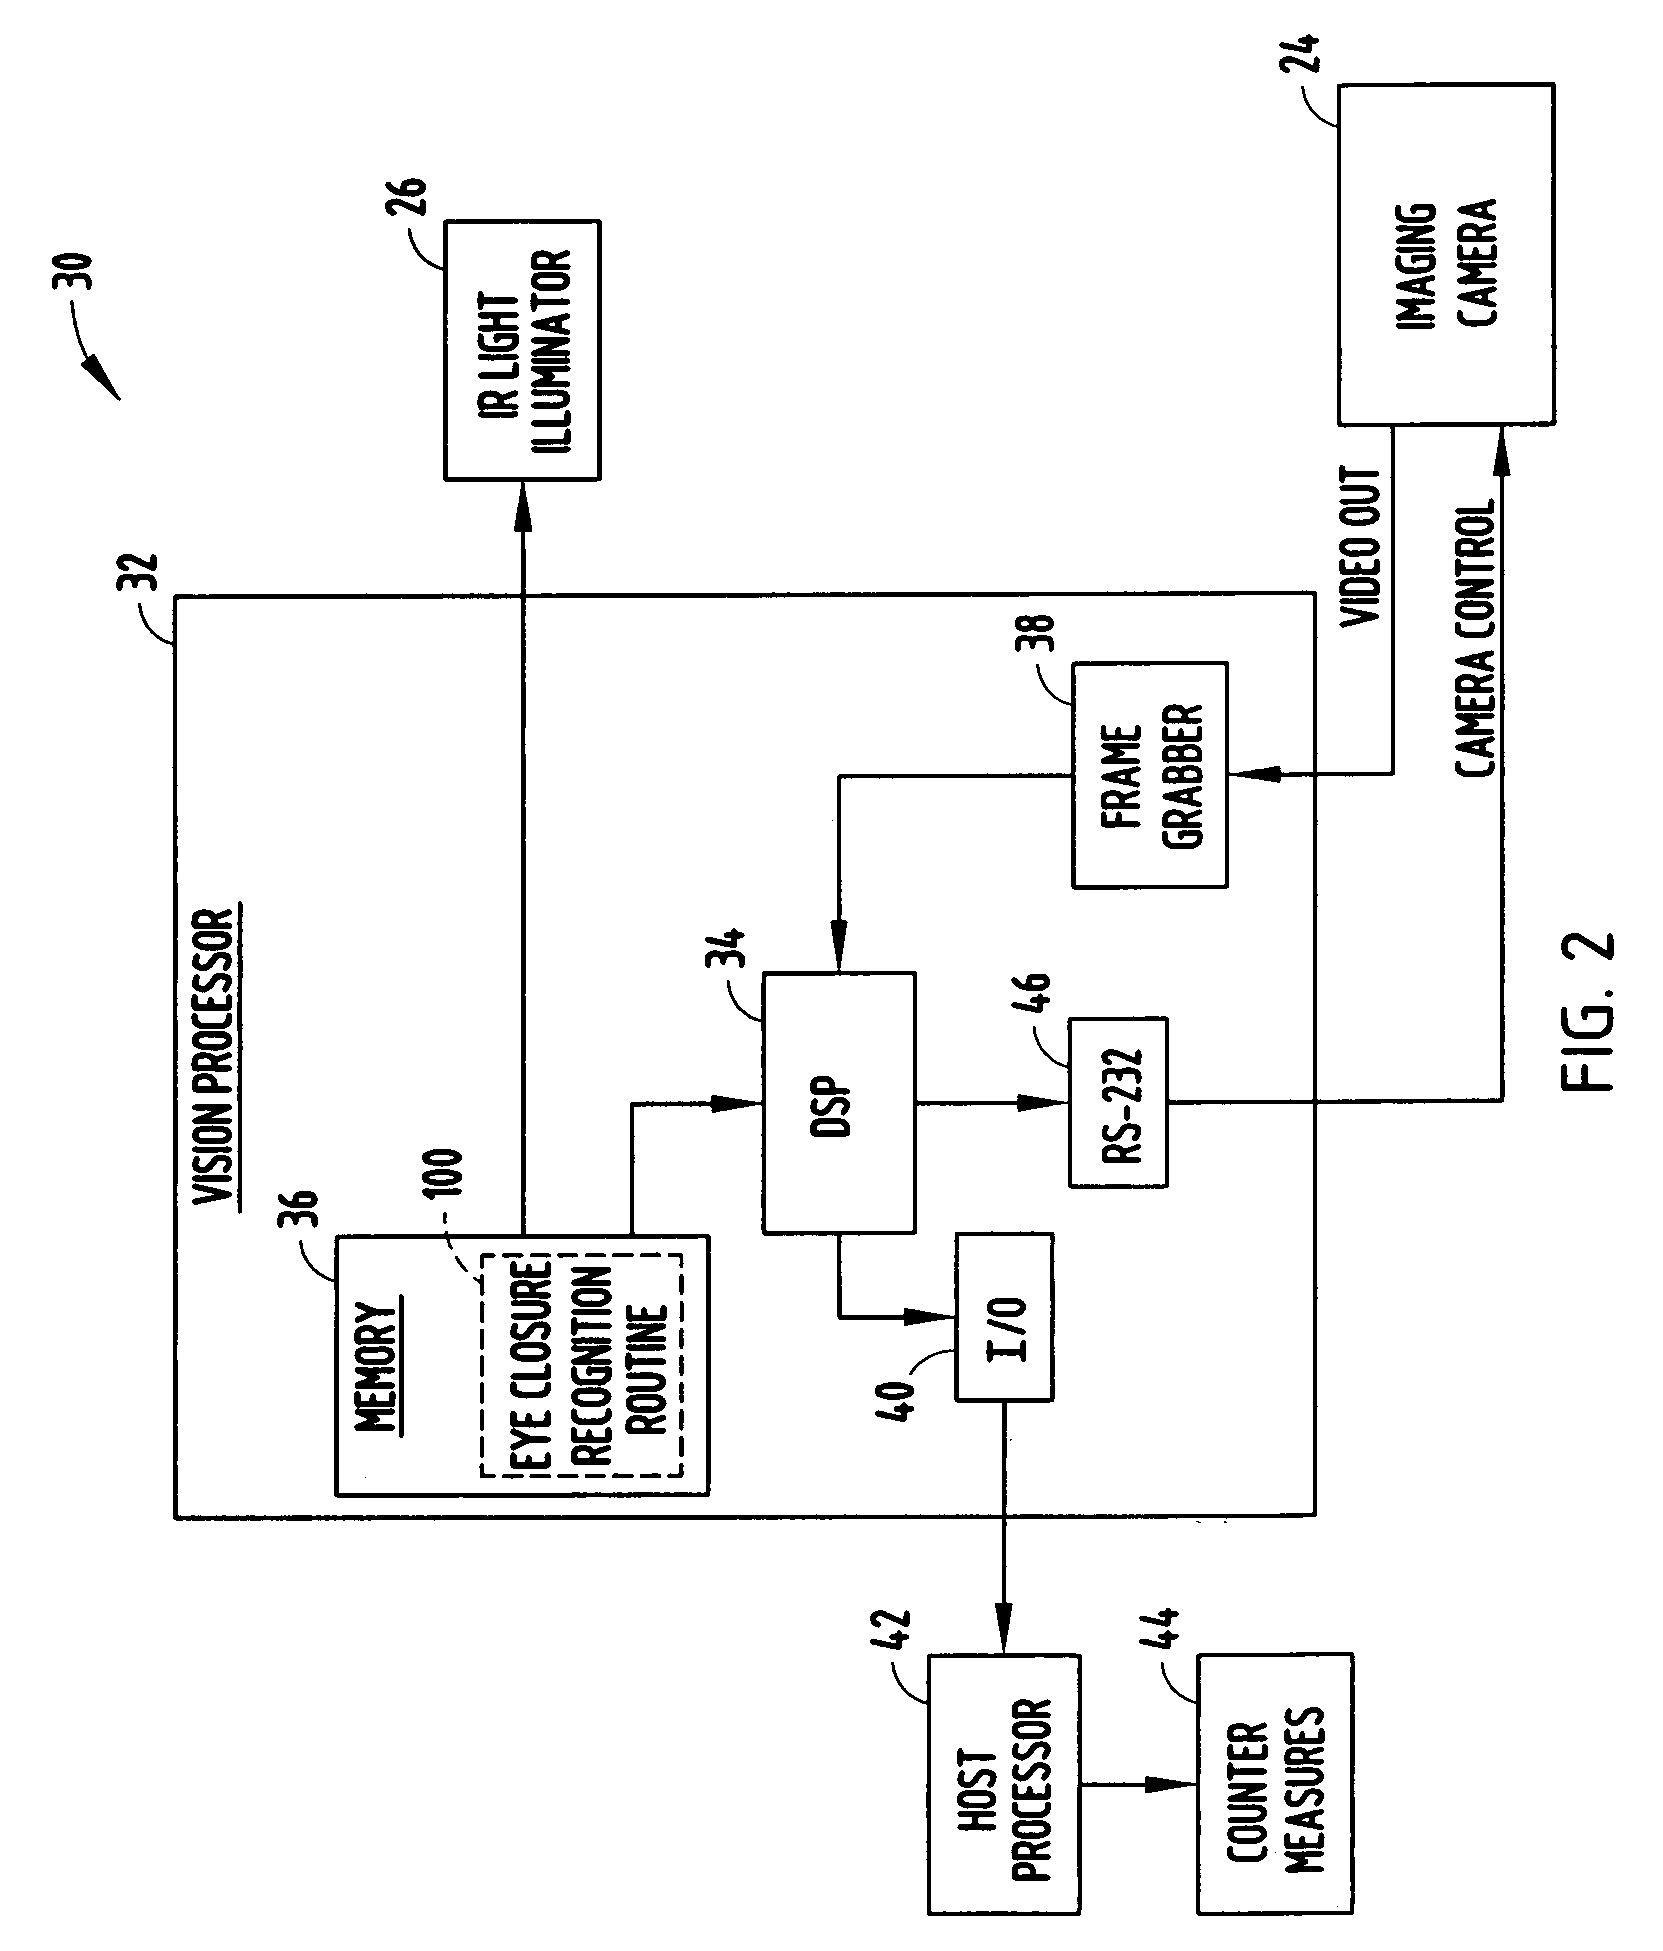 System and method for determining eye closure state